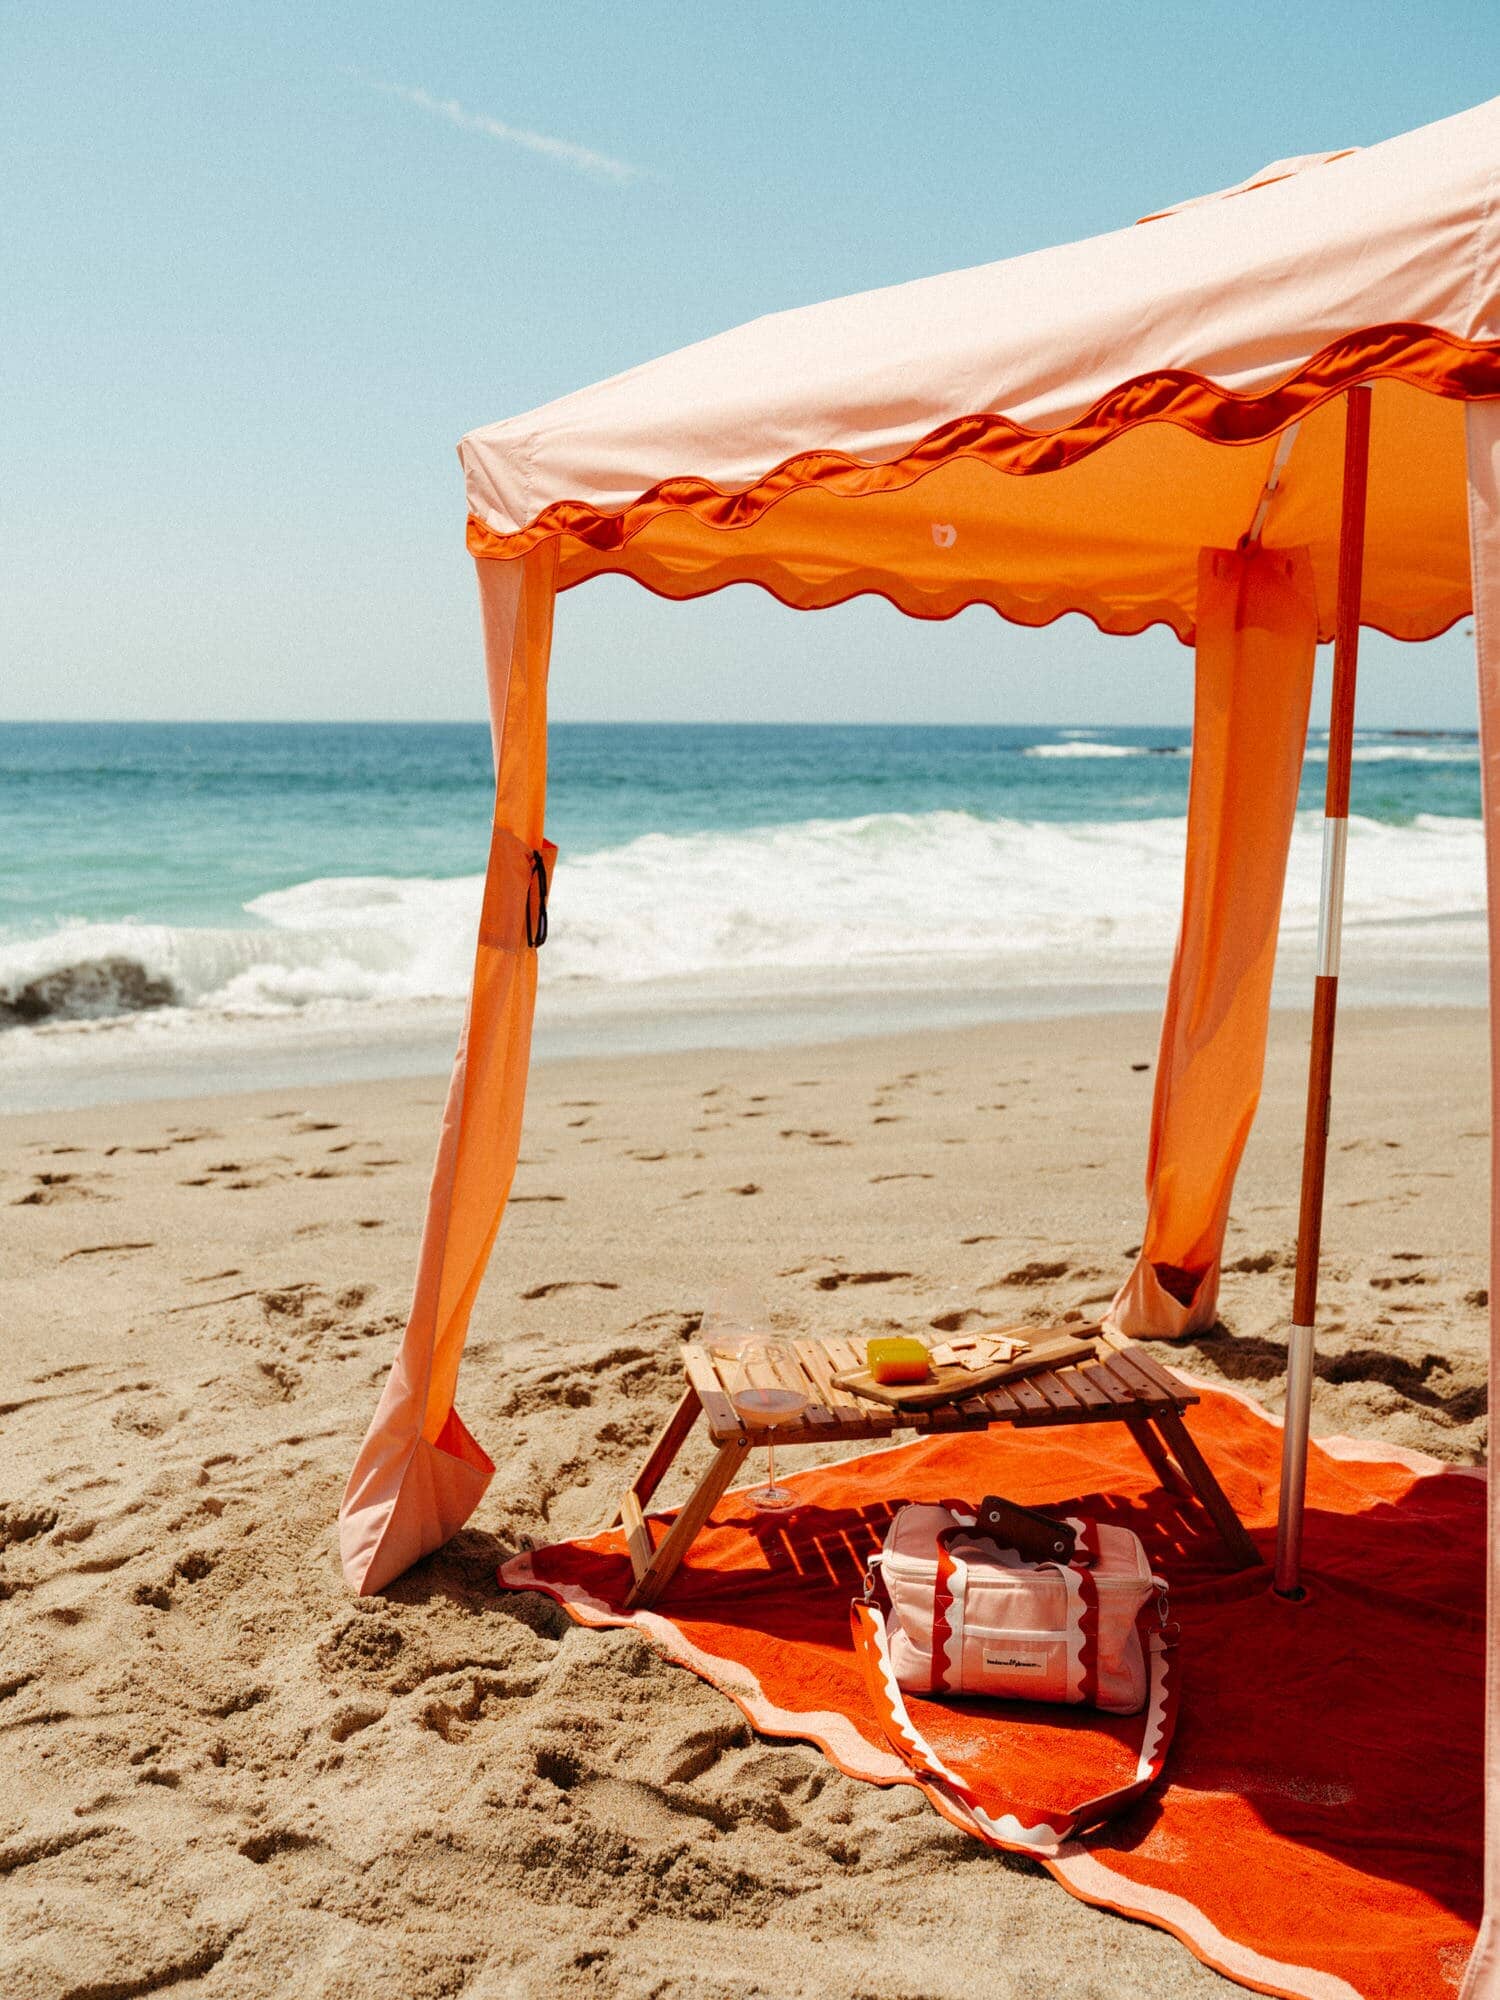 riviera pink cabana, blanket, cooler and table on the beach